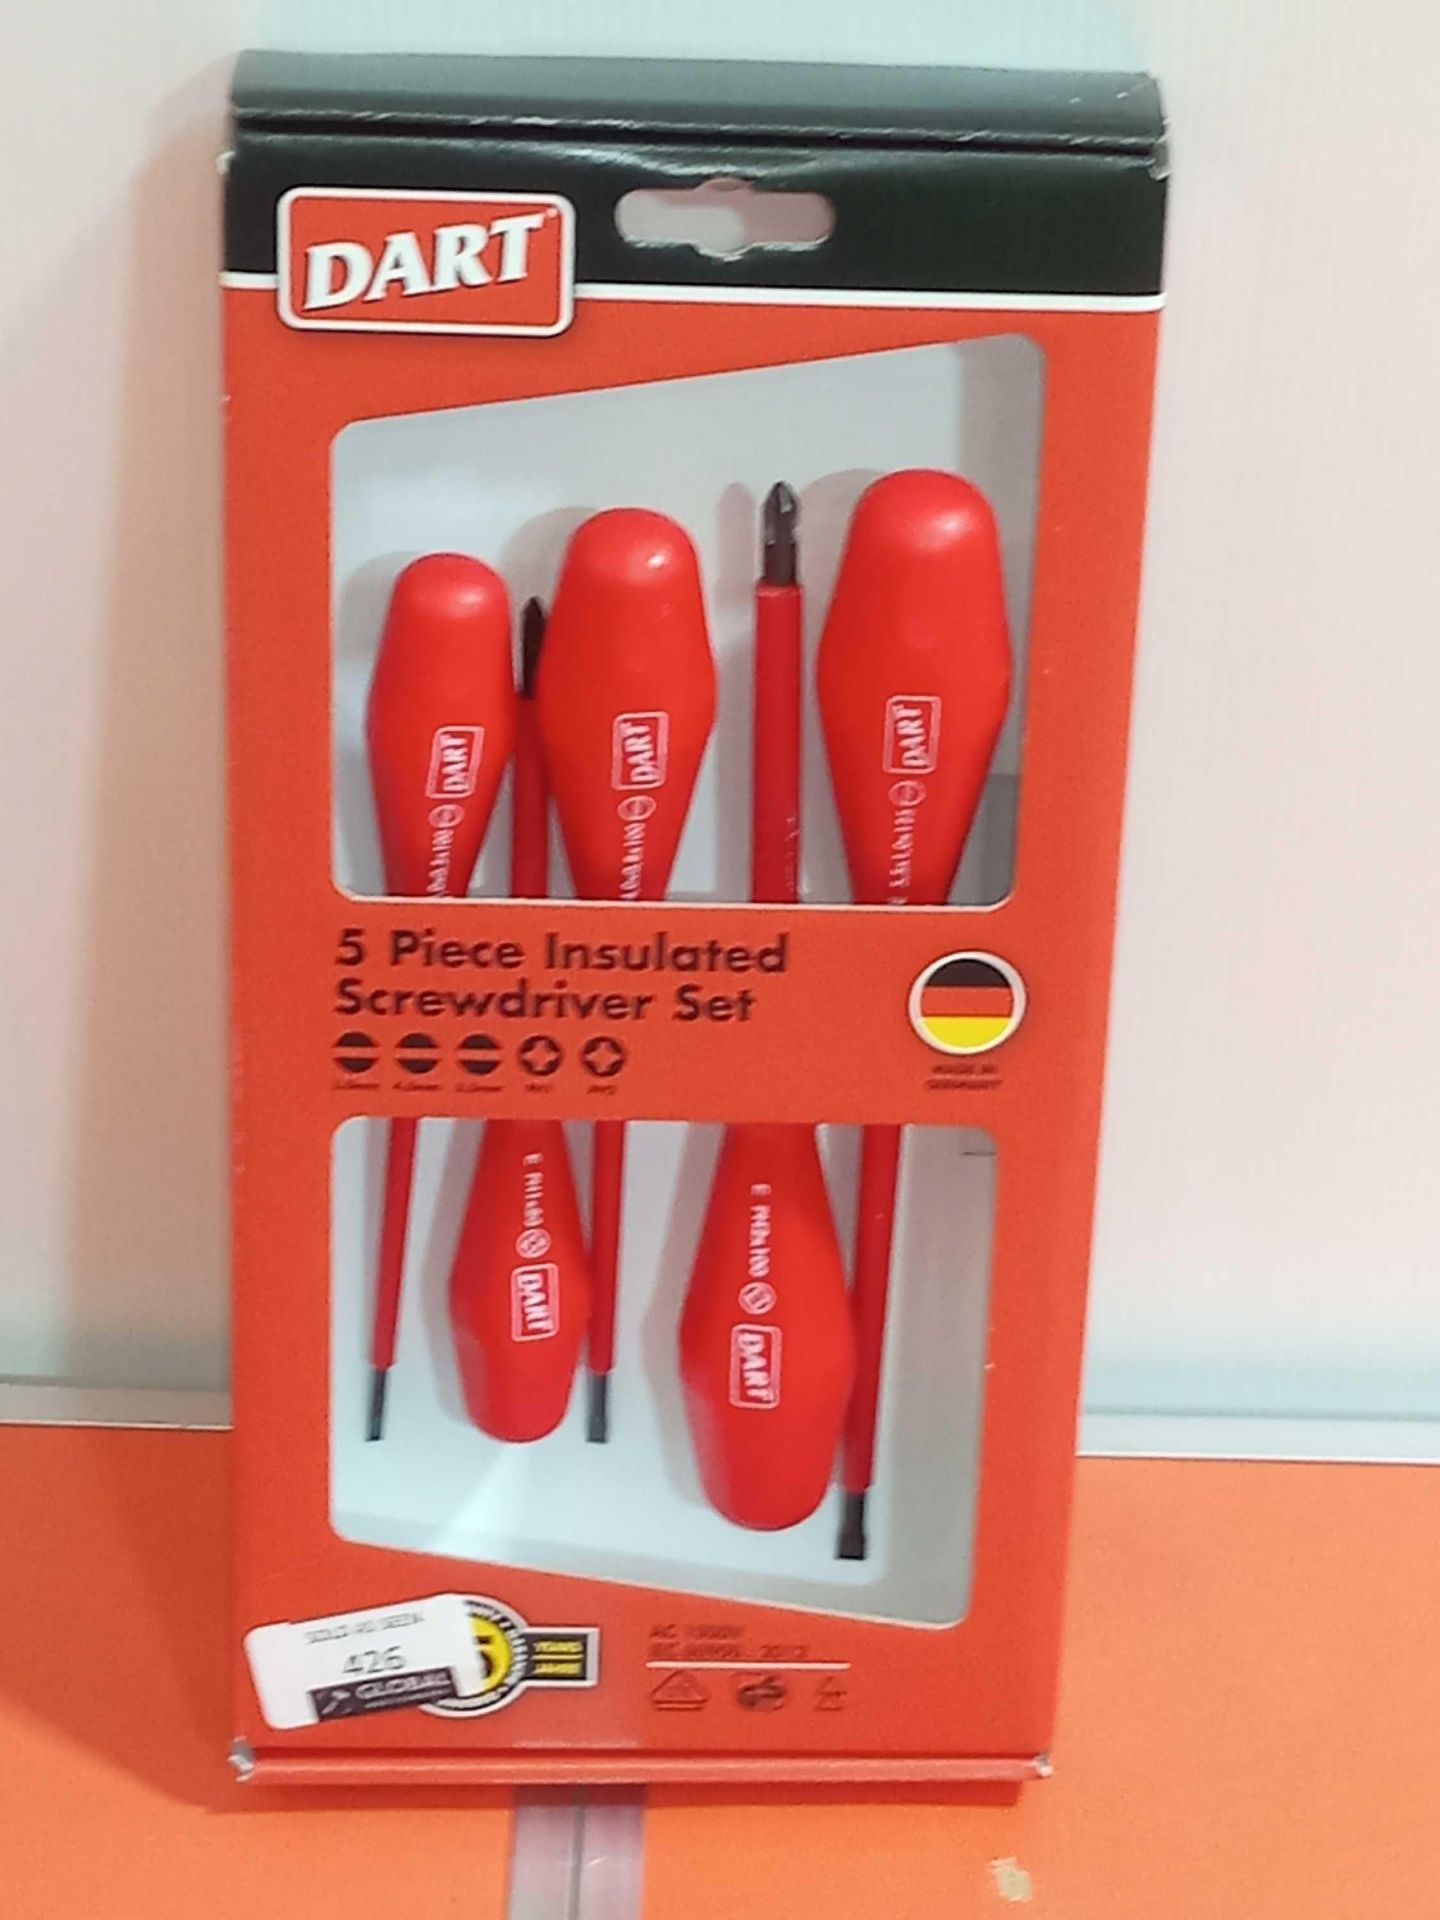 Rrp £30 Boxed Brand New Insulated Screwdriver Set - Image 2 of 2